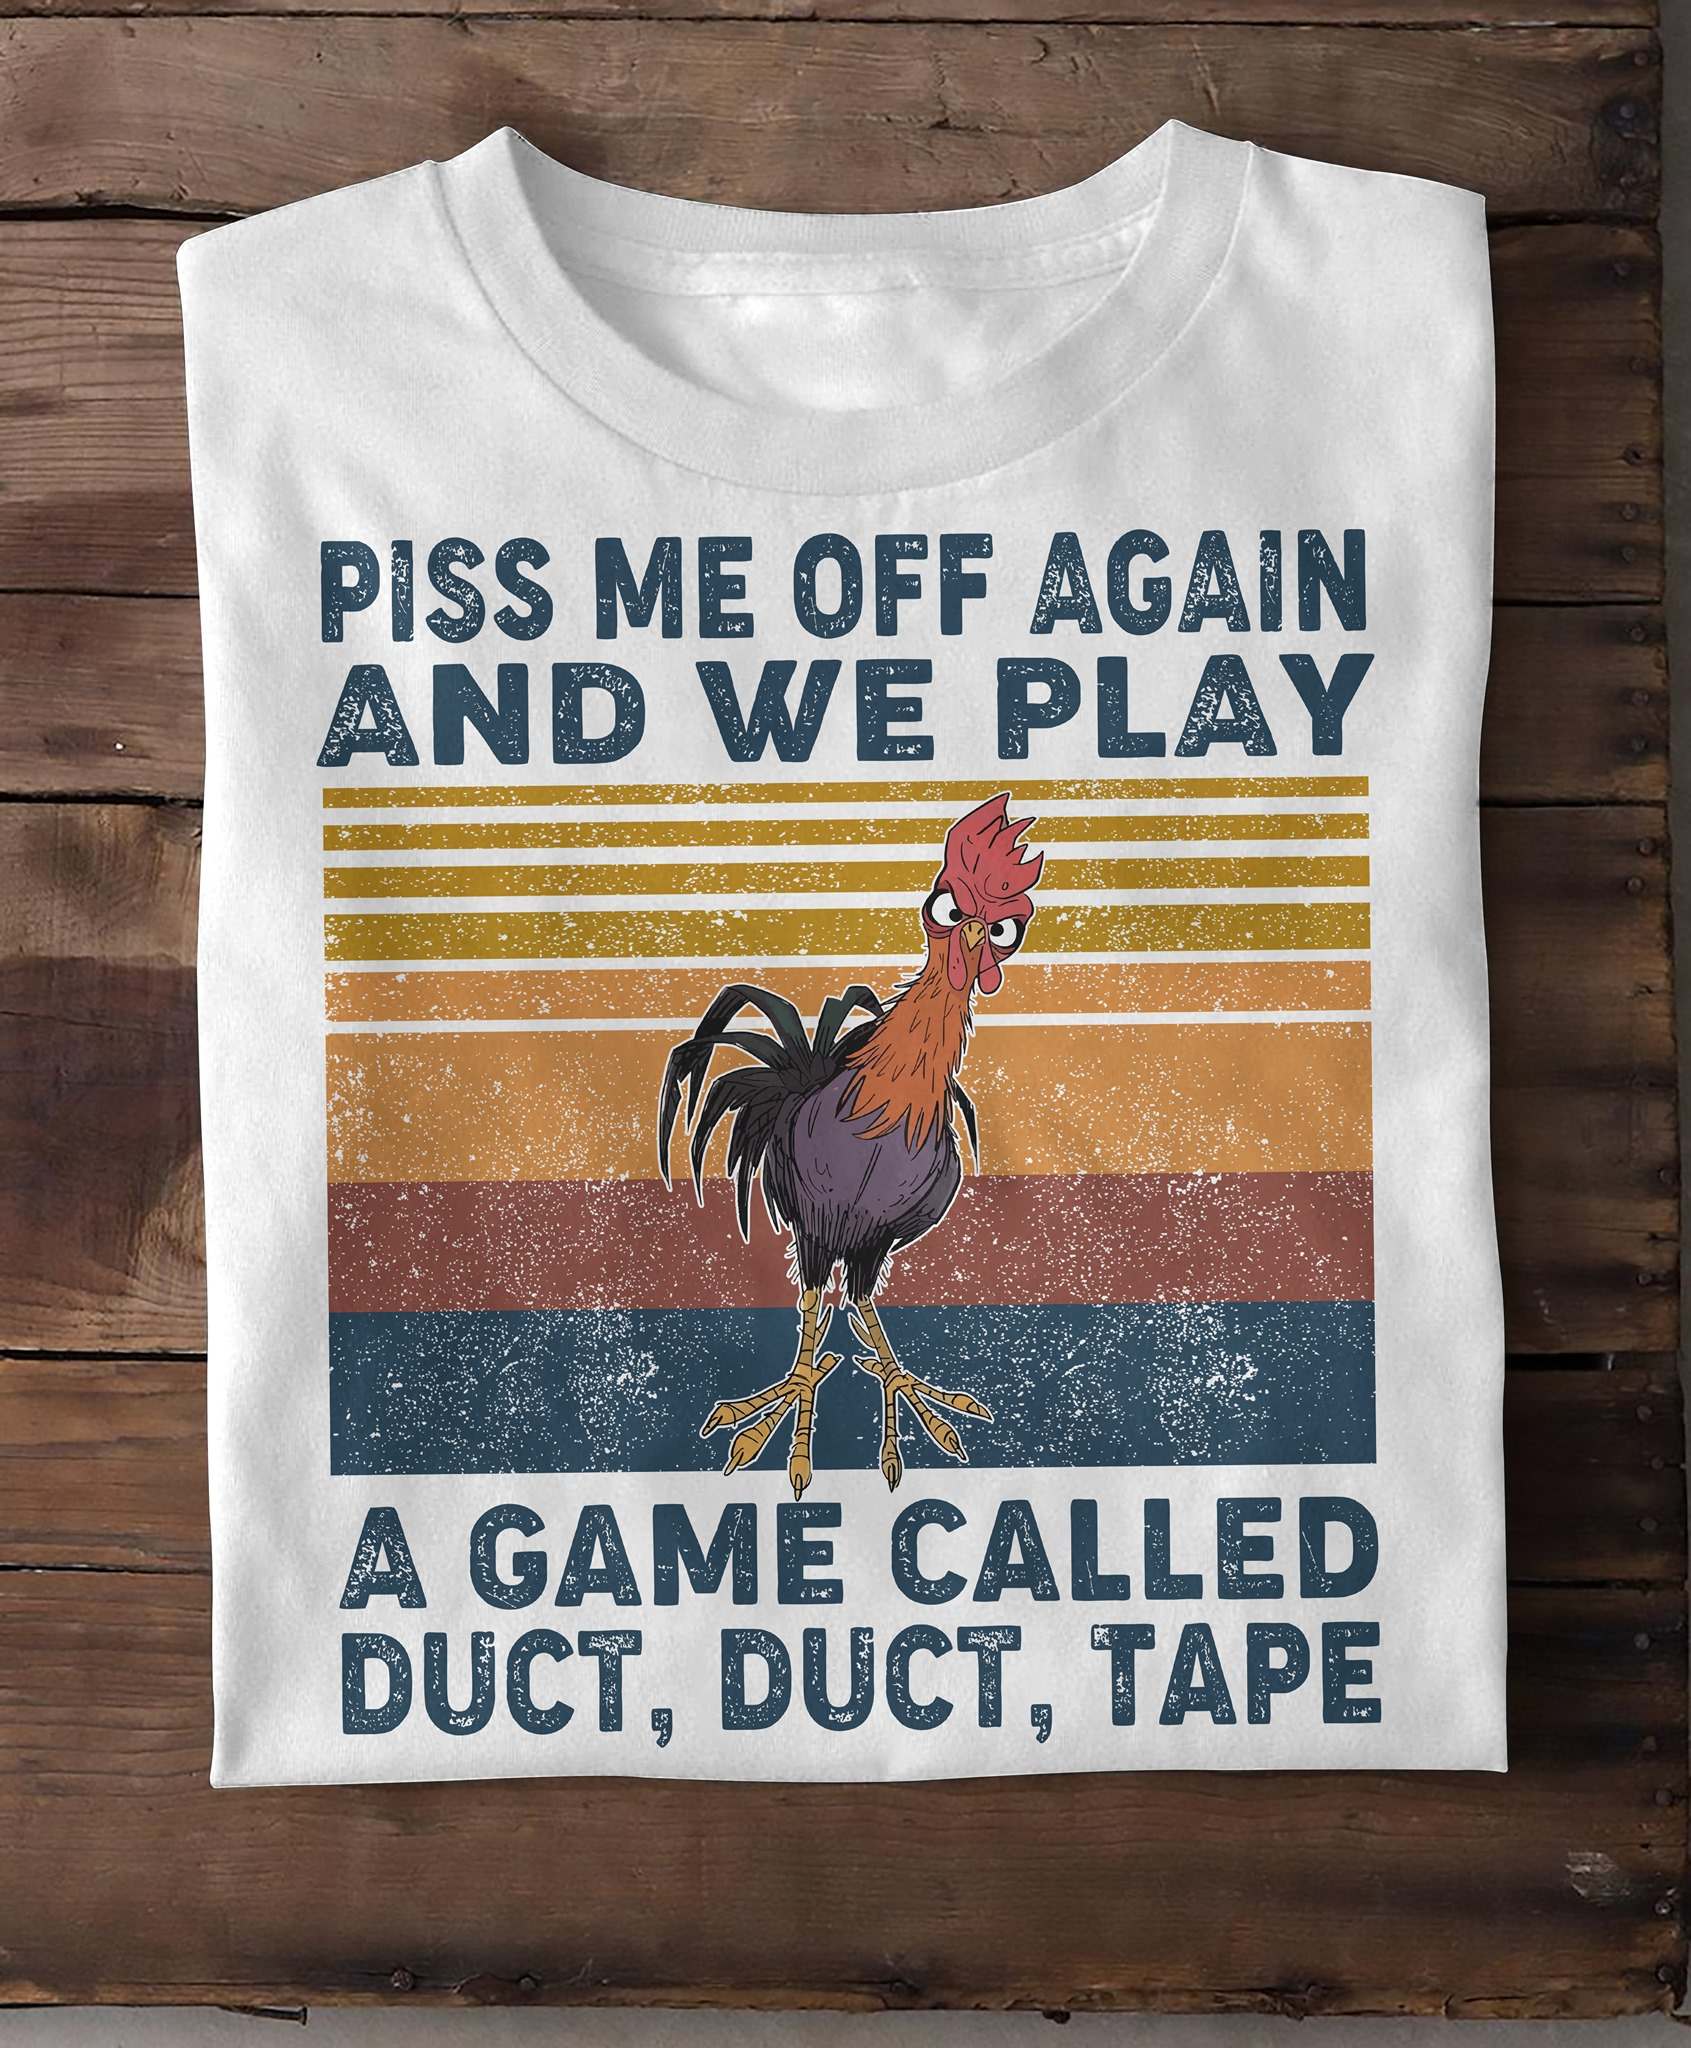 Grumpy Chicken - Piss me off again and we play a game called duct duct tape